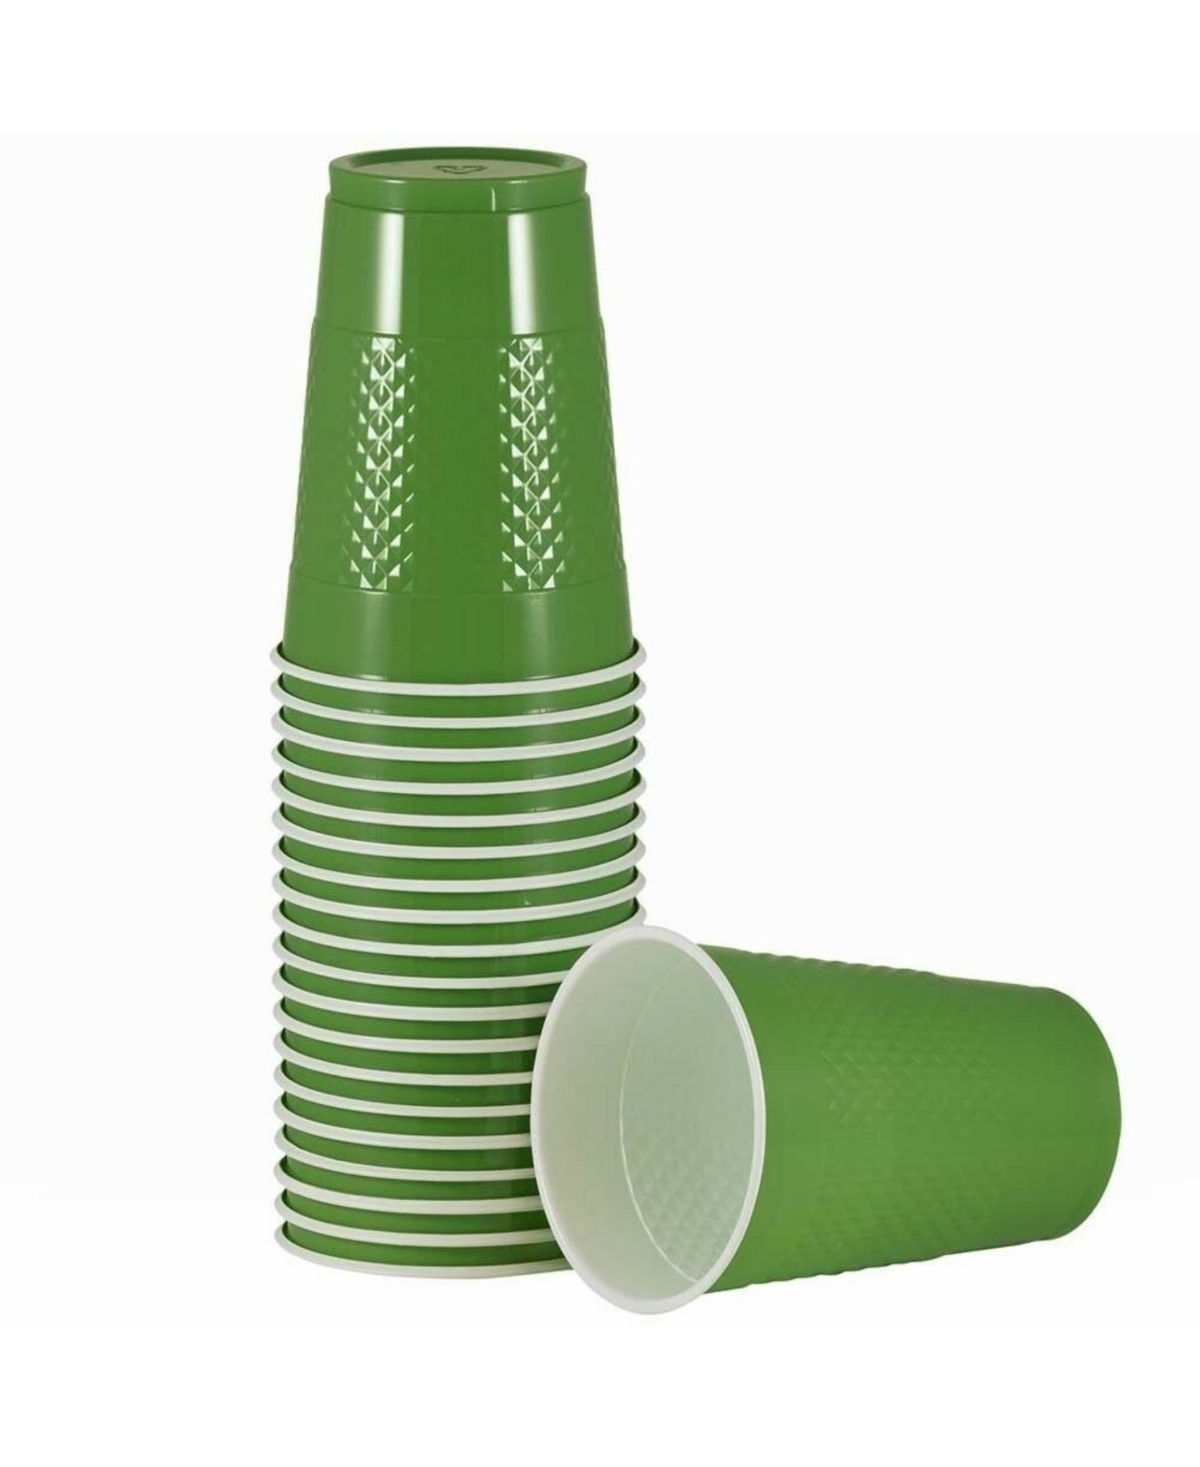 Plastic Party Cups - 16 Ounces - 20 Glasses Per Pack - Green